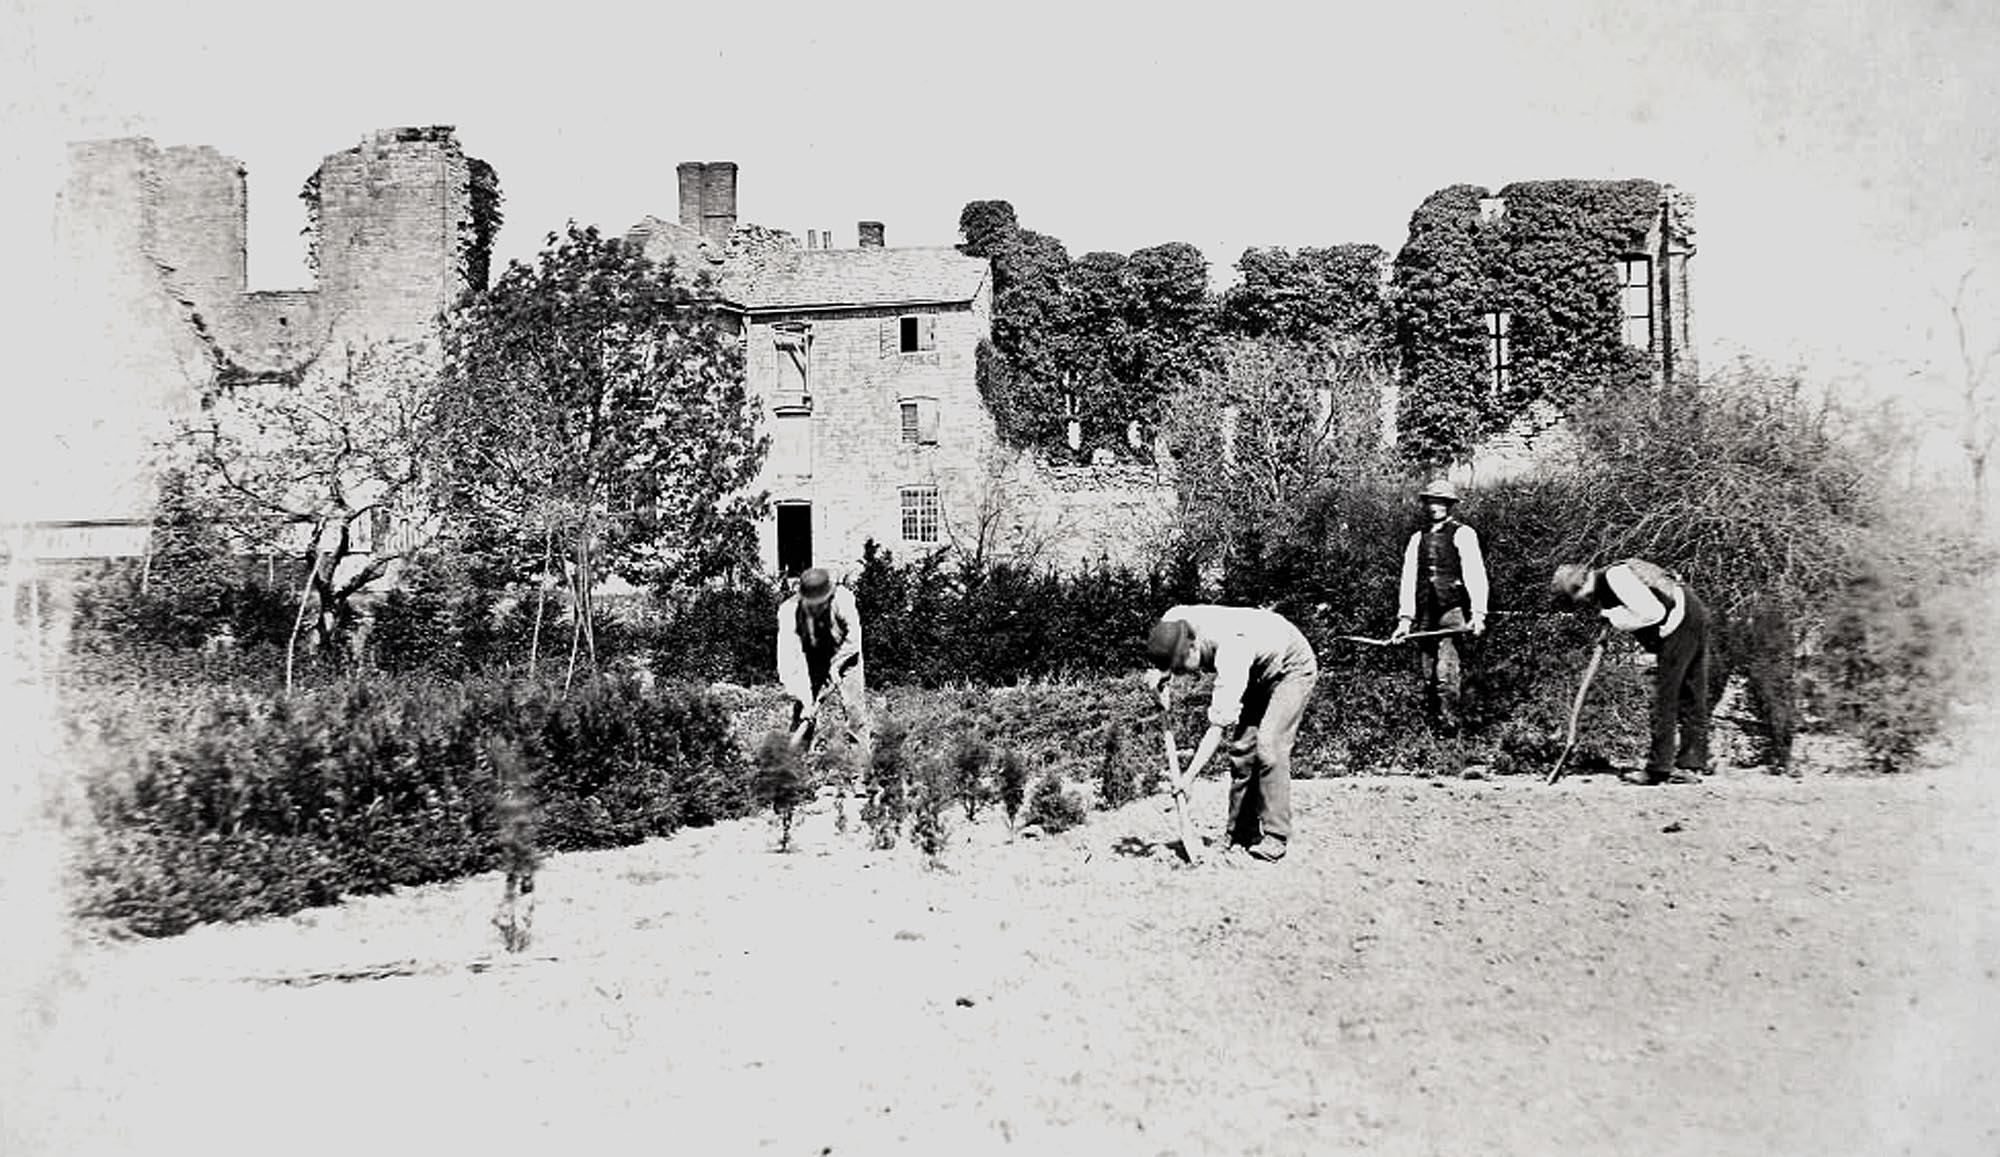 Gardeners working near the Cavendish House Ruins in Abbey Park, circa 1900. This section of the park was a plant nursery until the 1930s - 